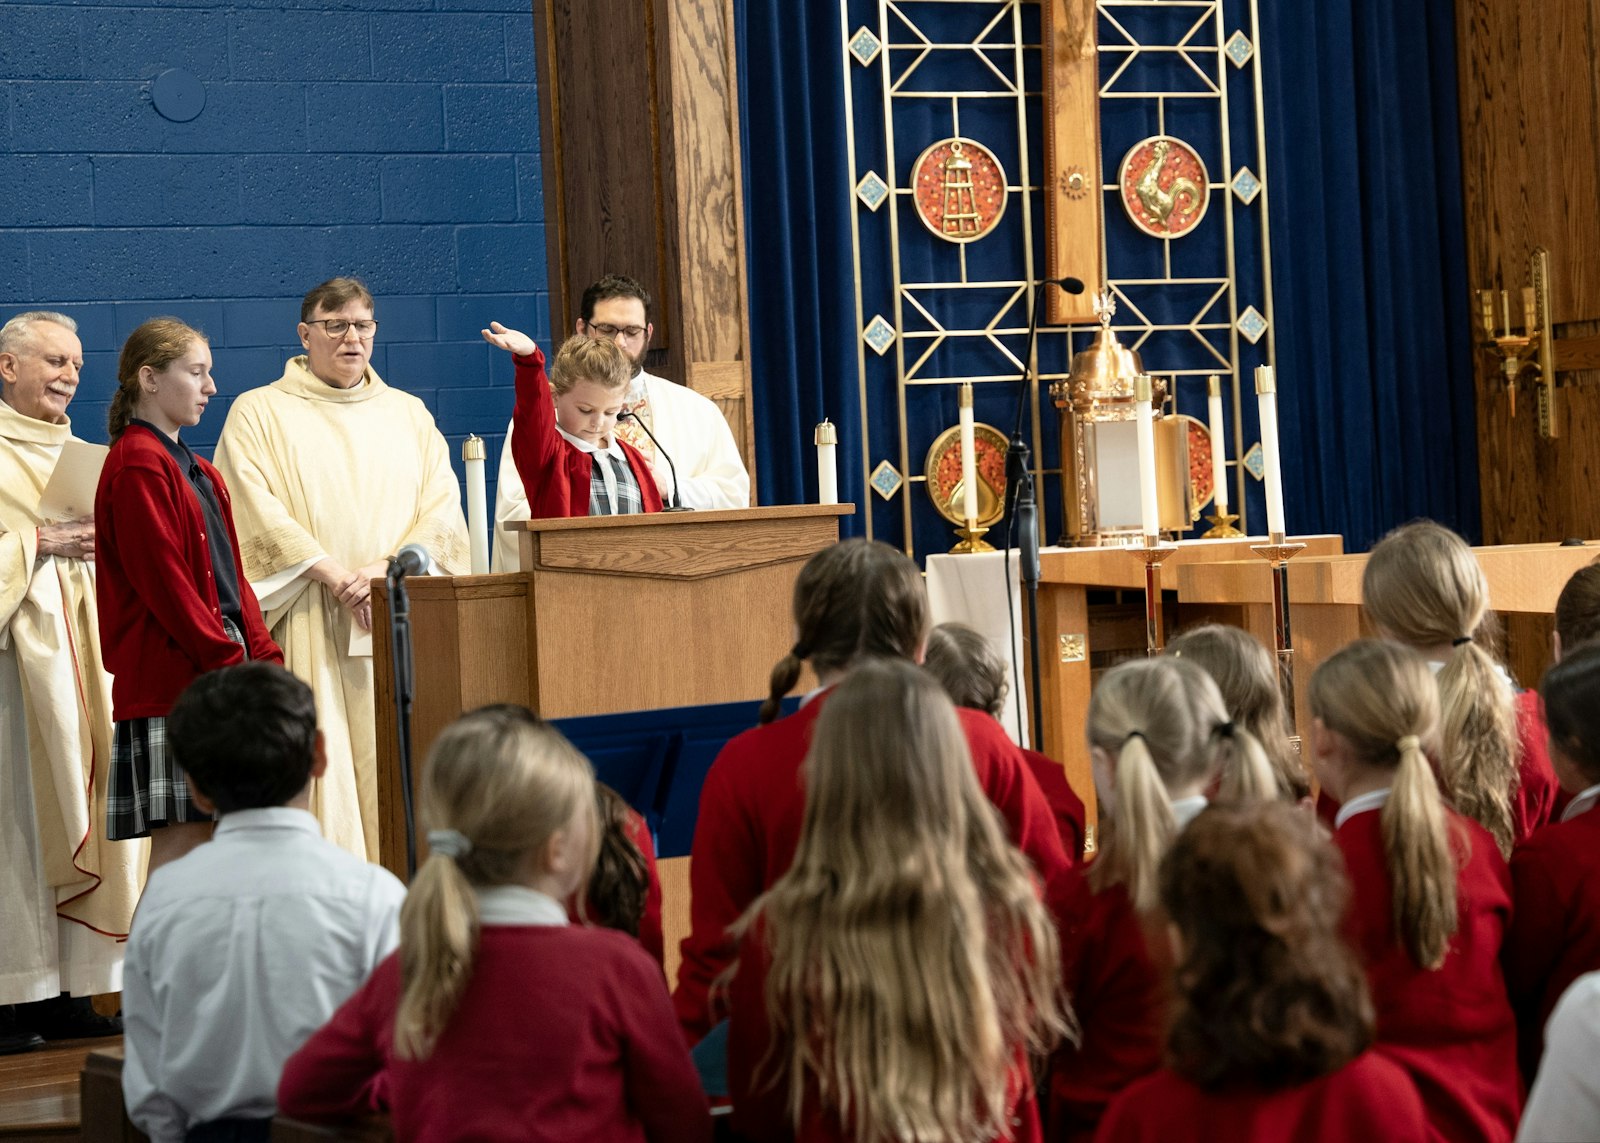 Students played important roles during the Mass. Fr. Maksym said he wants the new chapel to inspire students to seek and stay close to God as they grow up.